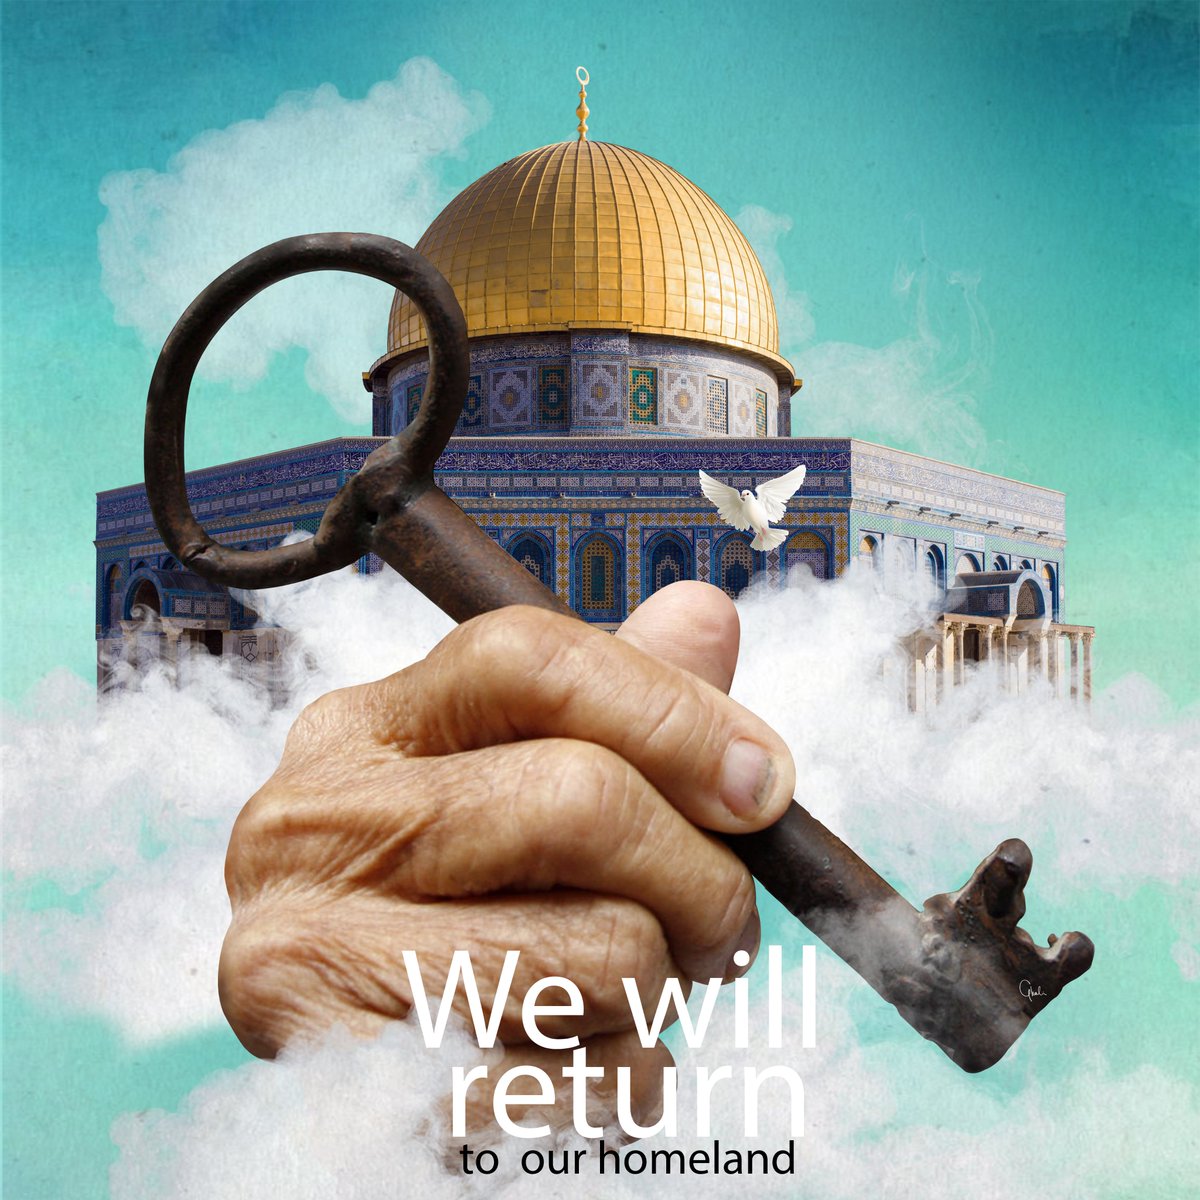 ❁ Return is our Right and our Will ❁ ❀ #FreePalestine ❀ •❁🇵🇸🗝️🍉🥄❁ •